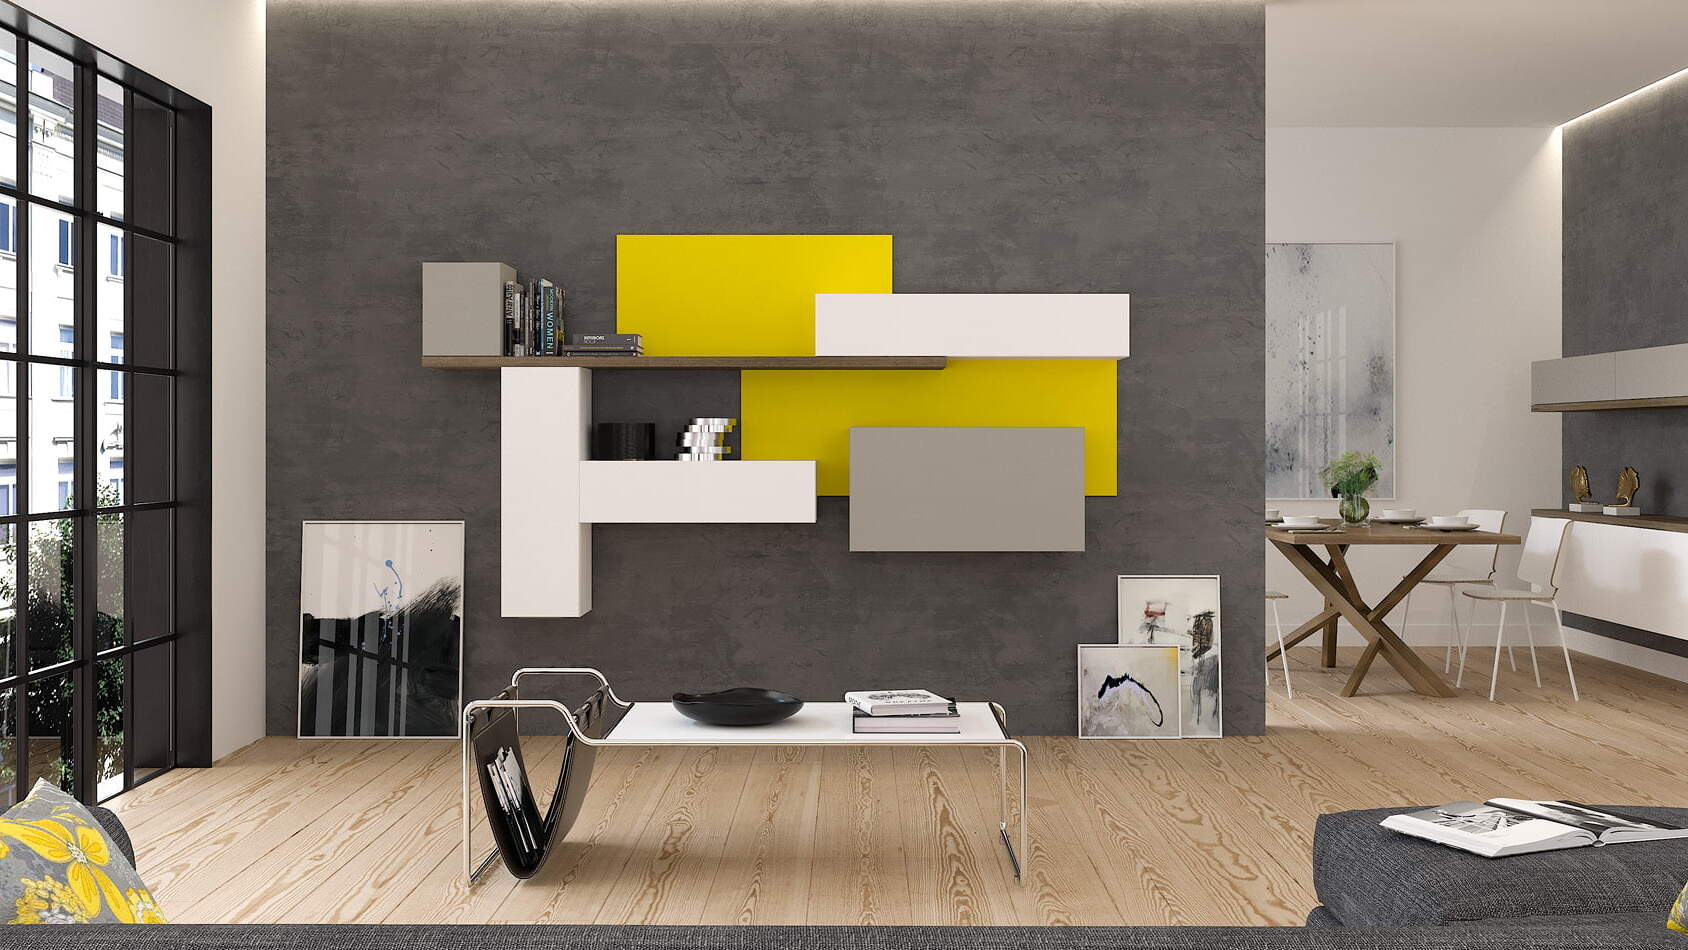 centro kitchen, living, furniture for every household, sofa, table, living room, arm chair, hanging units, yellow color, citrus